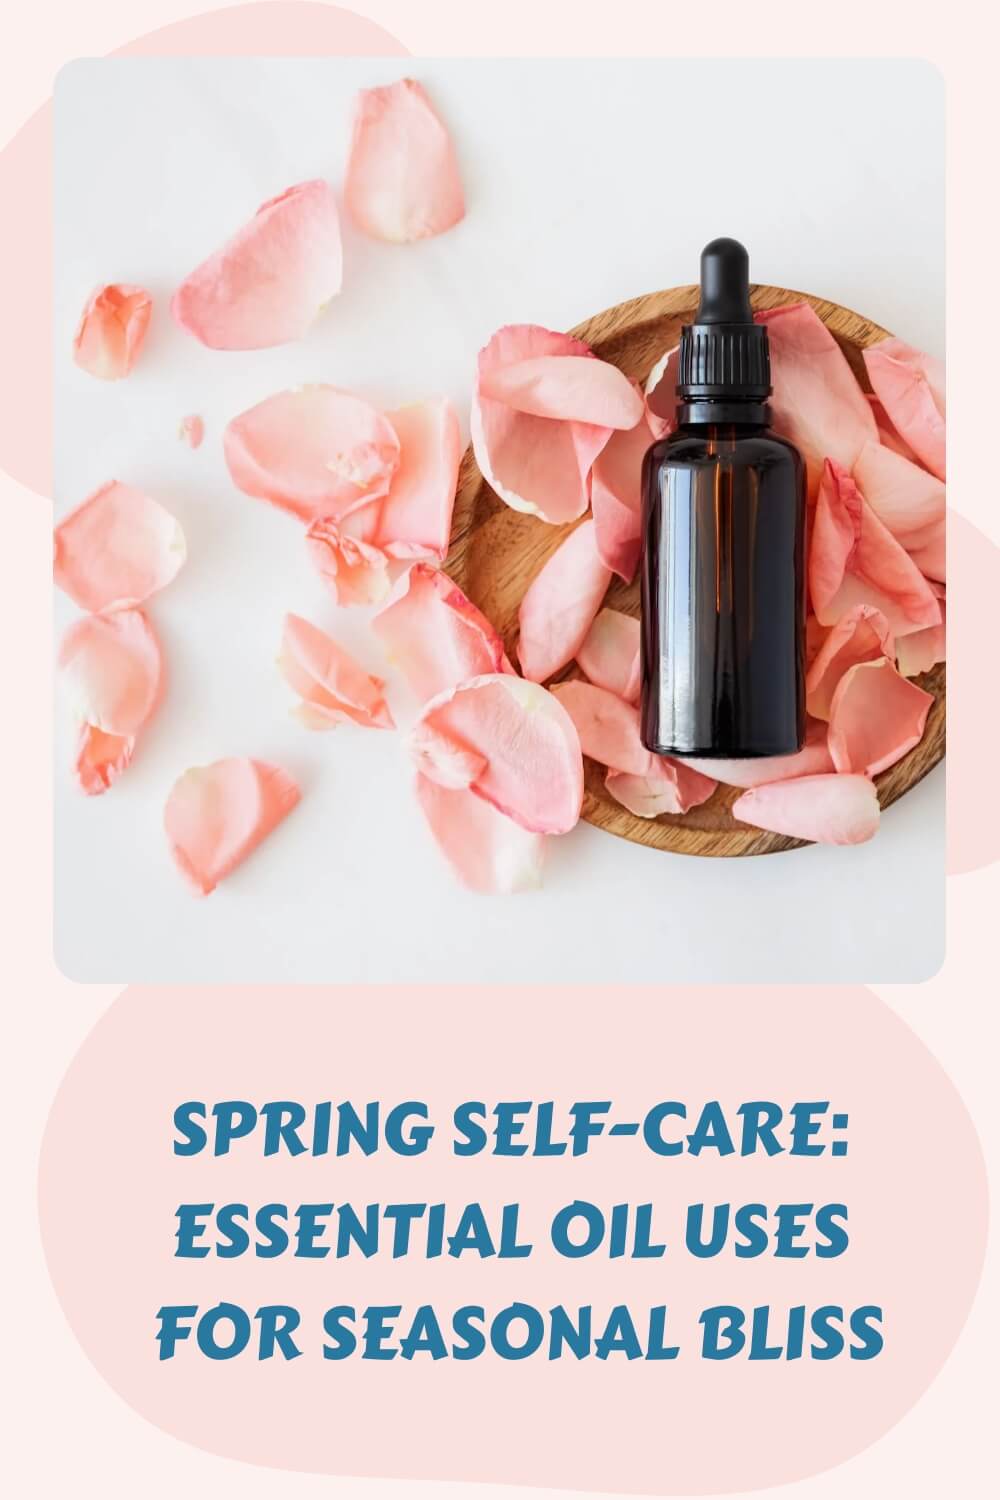 Spring Self-Care Essential Oil Uses